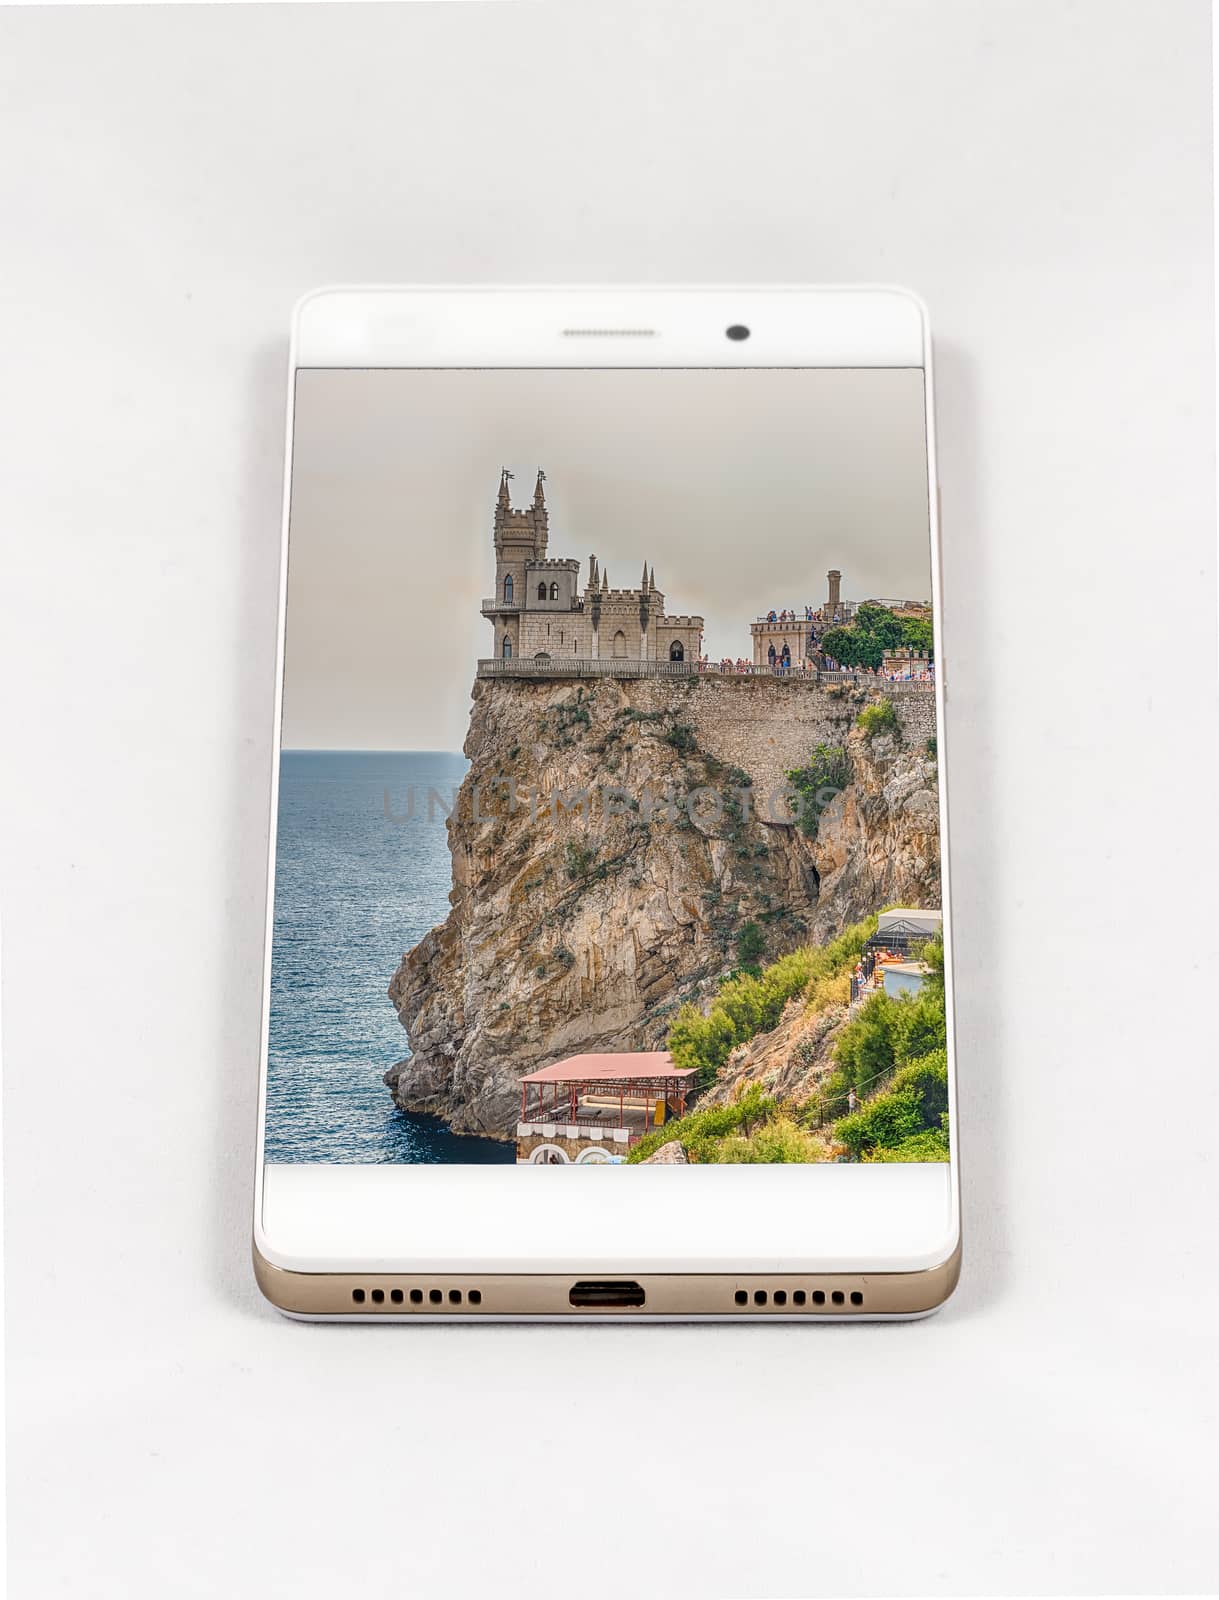 Modern smartphone displaying picture of Swallow's nest, scenic castle over the Black Sea, Yalta, Crimea. Concept for travel smartphone photography. All images in this composition are made by me and separately available on my portfolio